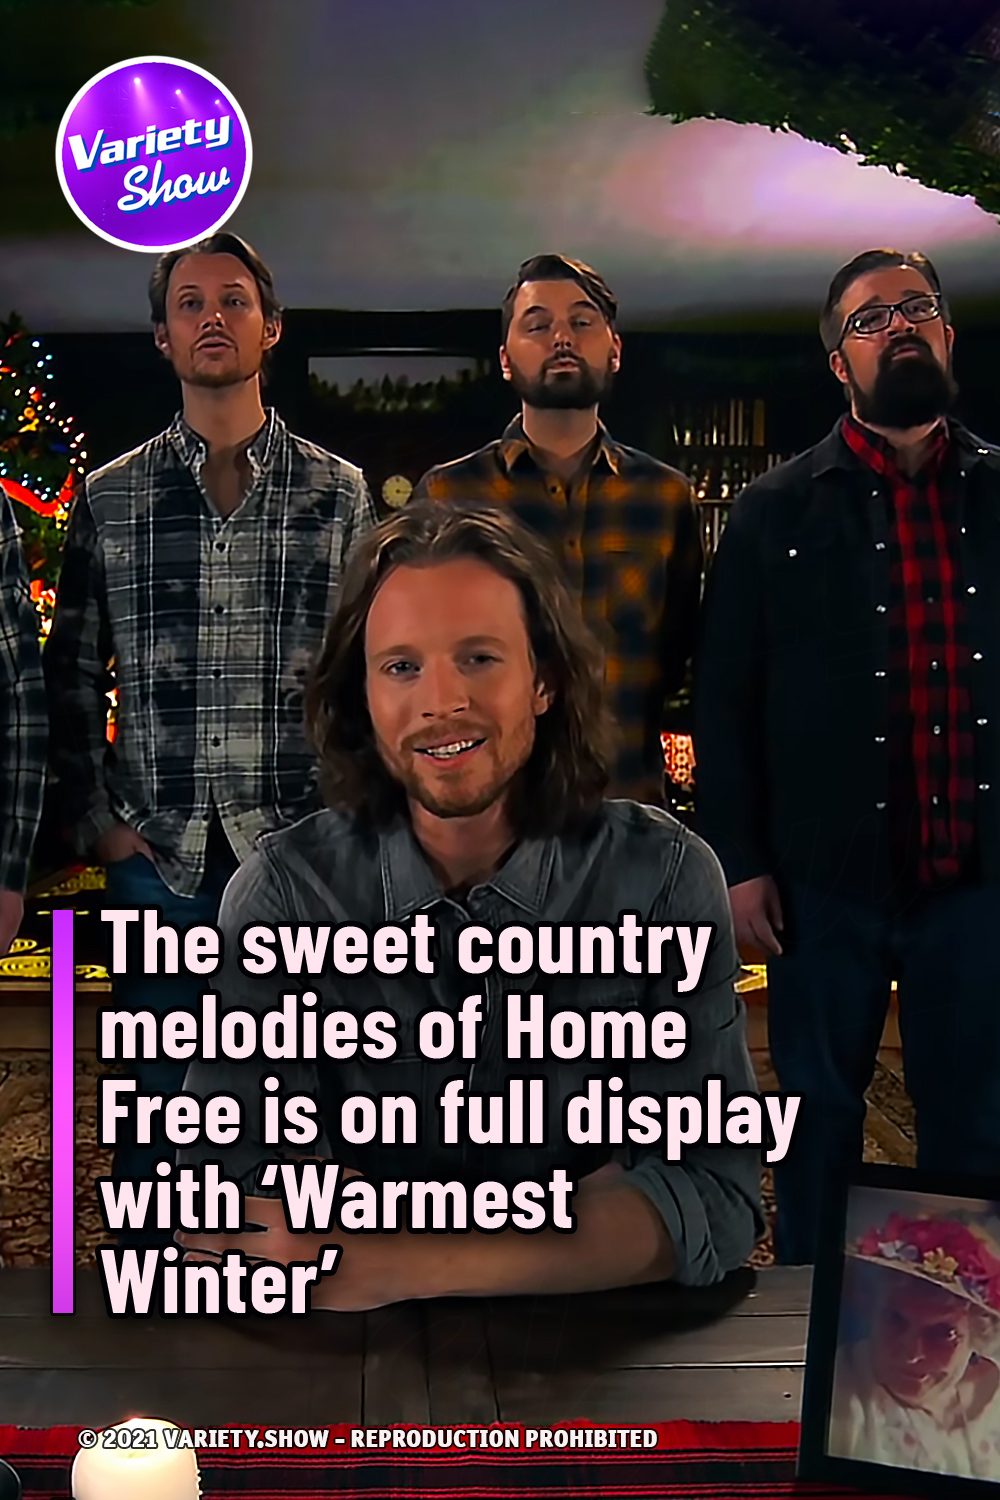 The sweet country melodies of Home Free is on full display with ‘Warmest Winter’